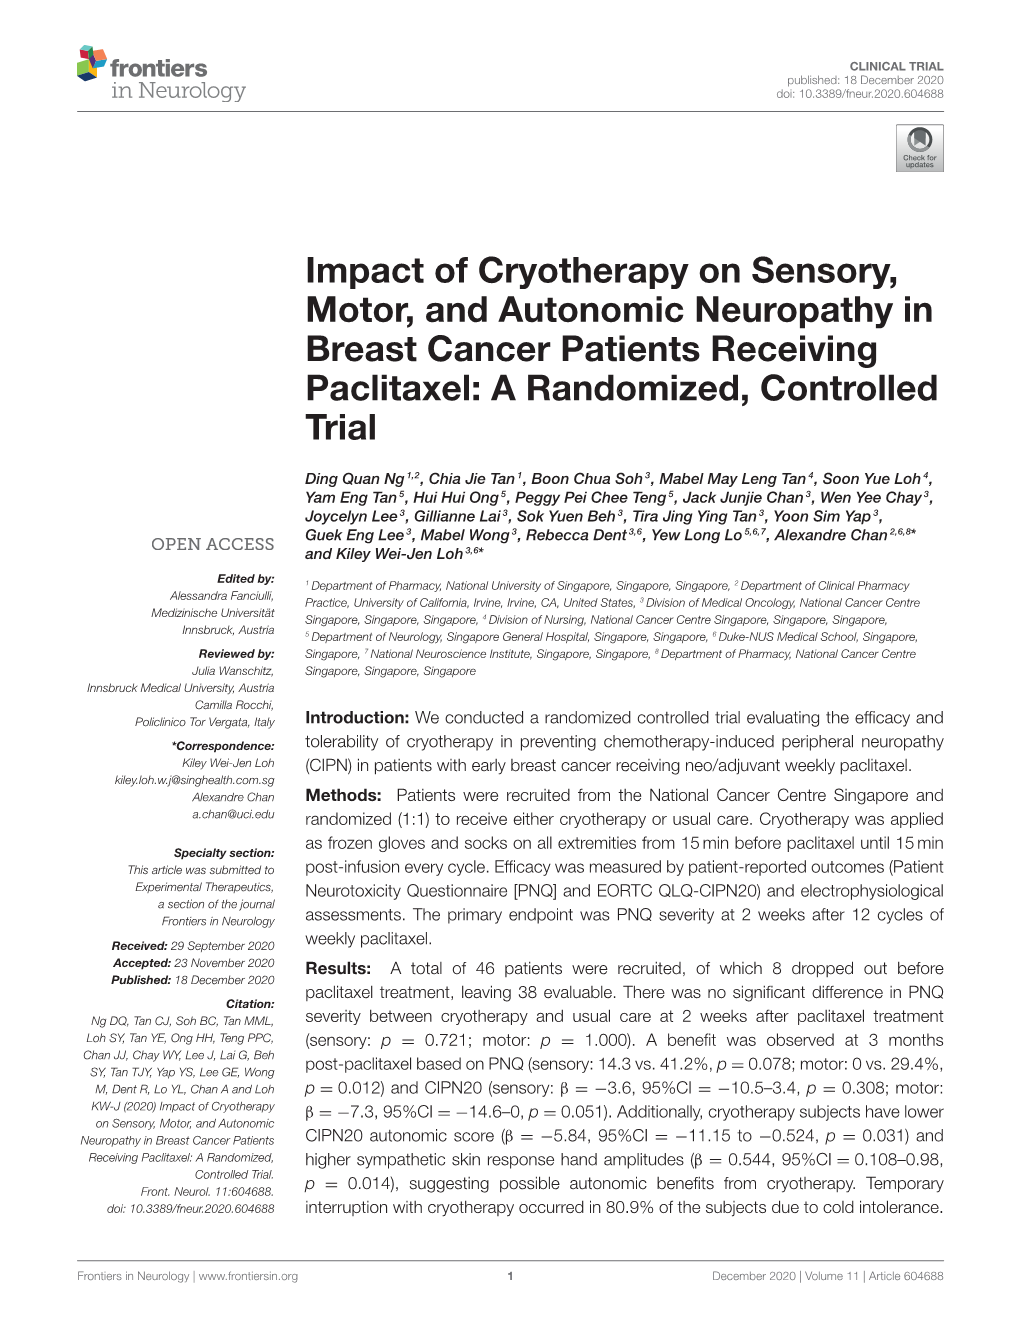 Impact of Cryotherapy on Sensory, Motor, and Autonomic Neuropathy in Breast Cancer Patients Receiving Paclitaxel: a Randomized, Controlled Trial